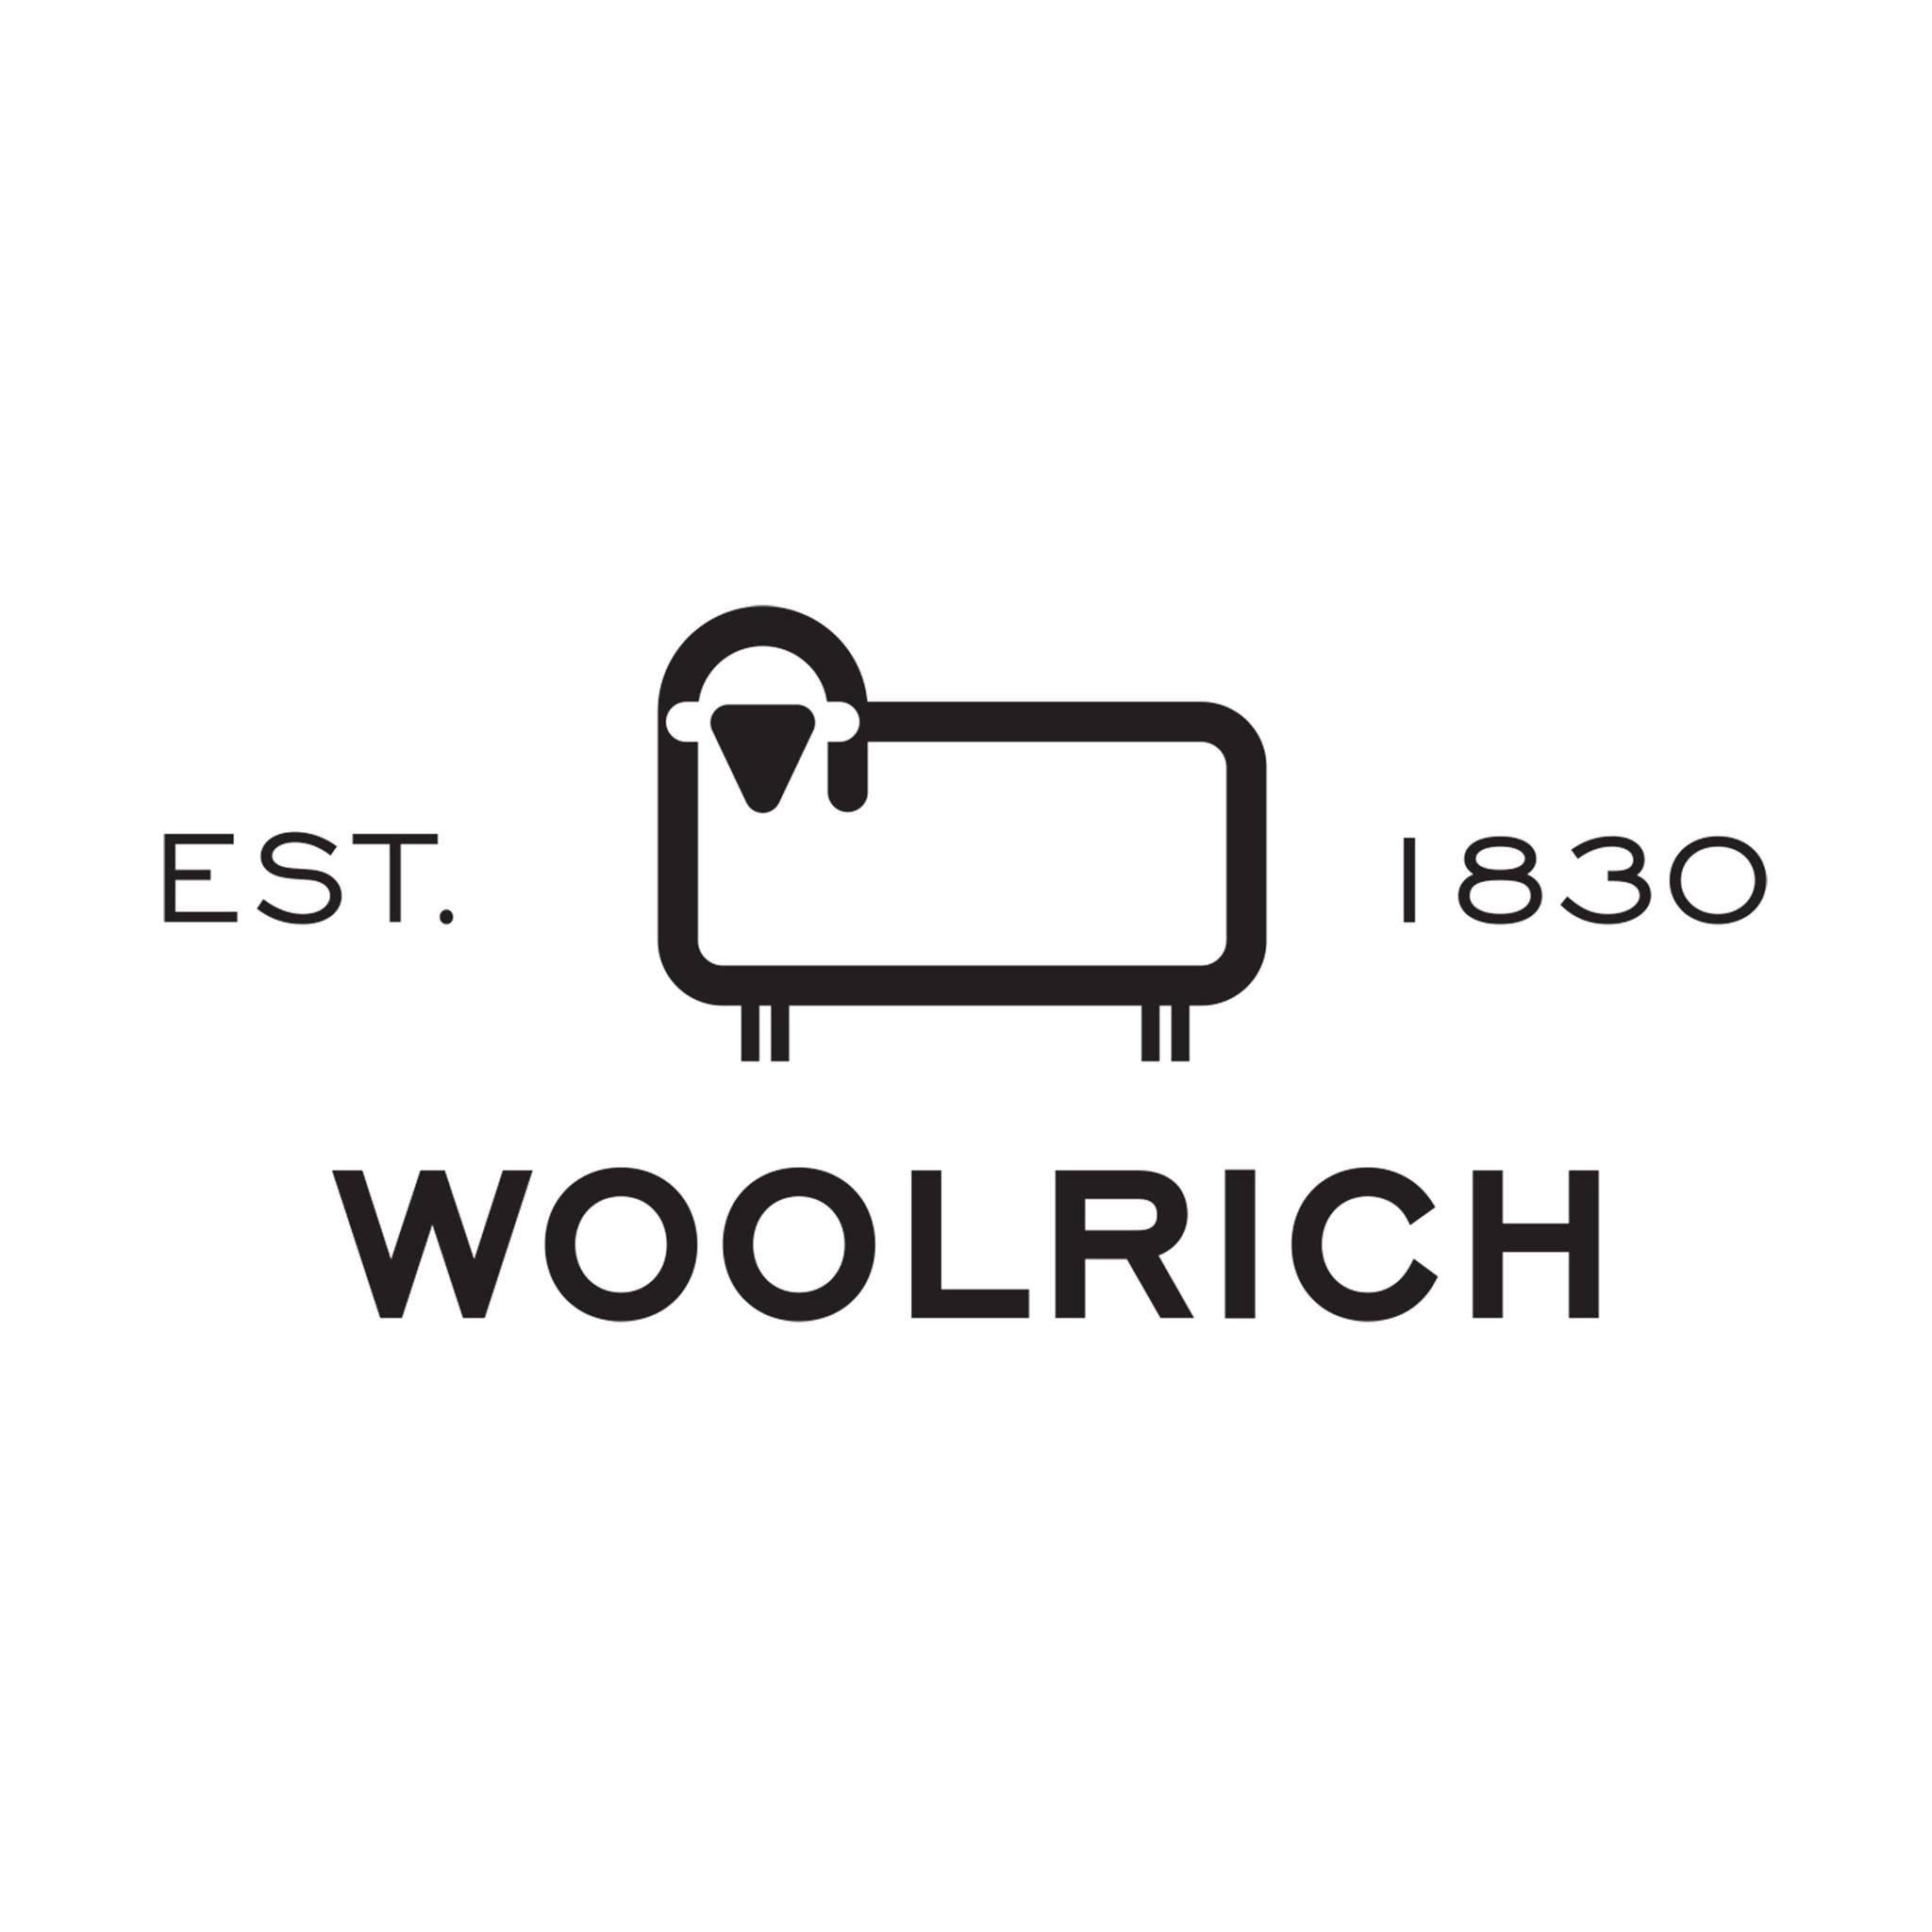 Woolrich Coupons